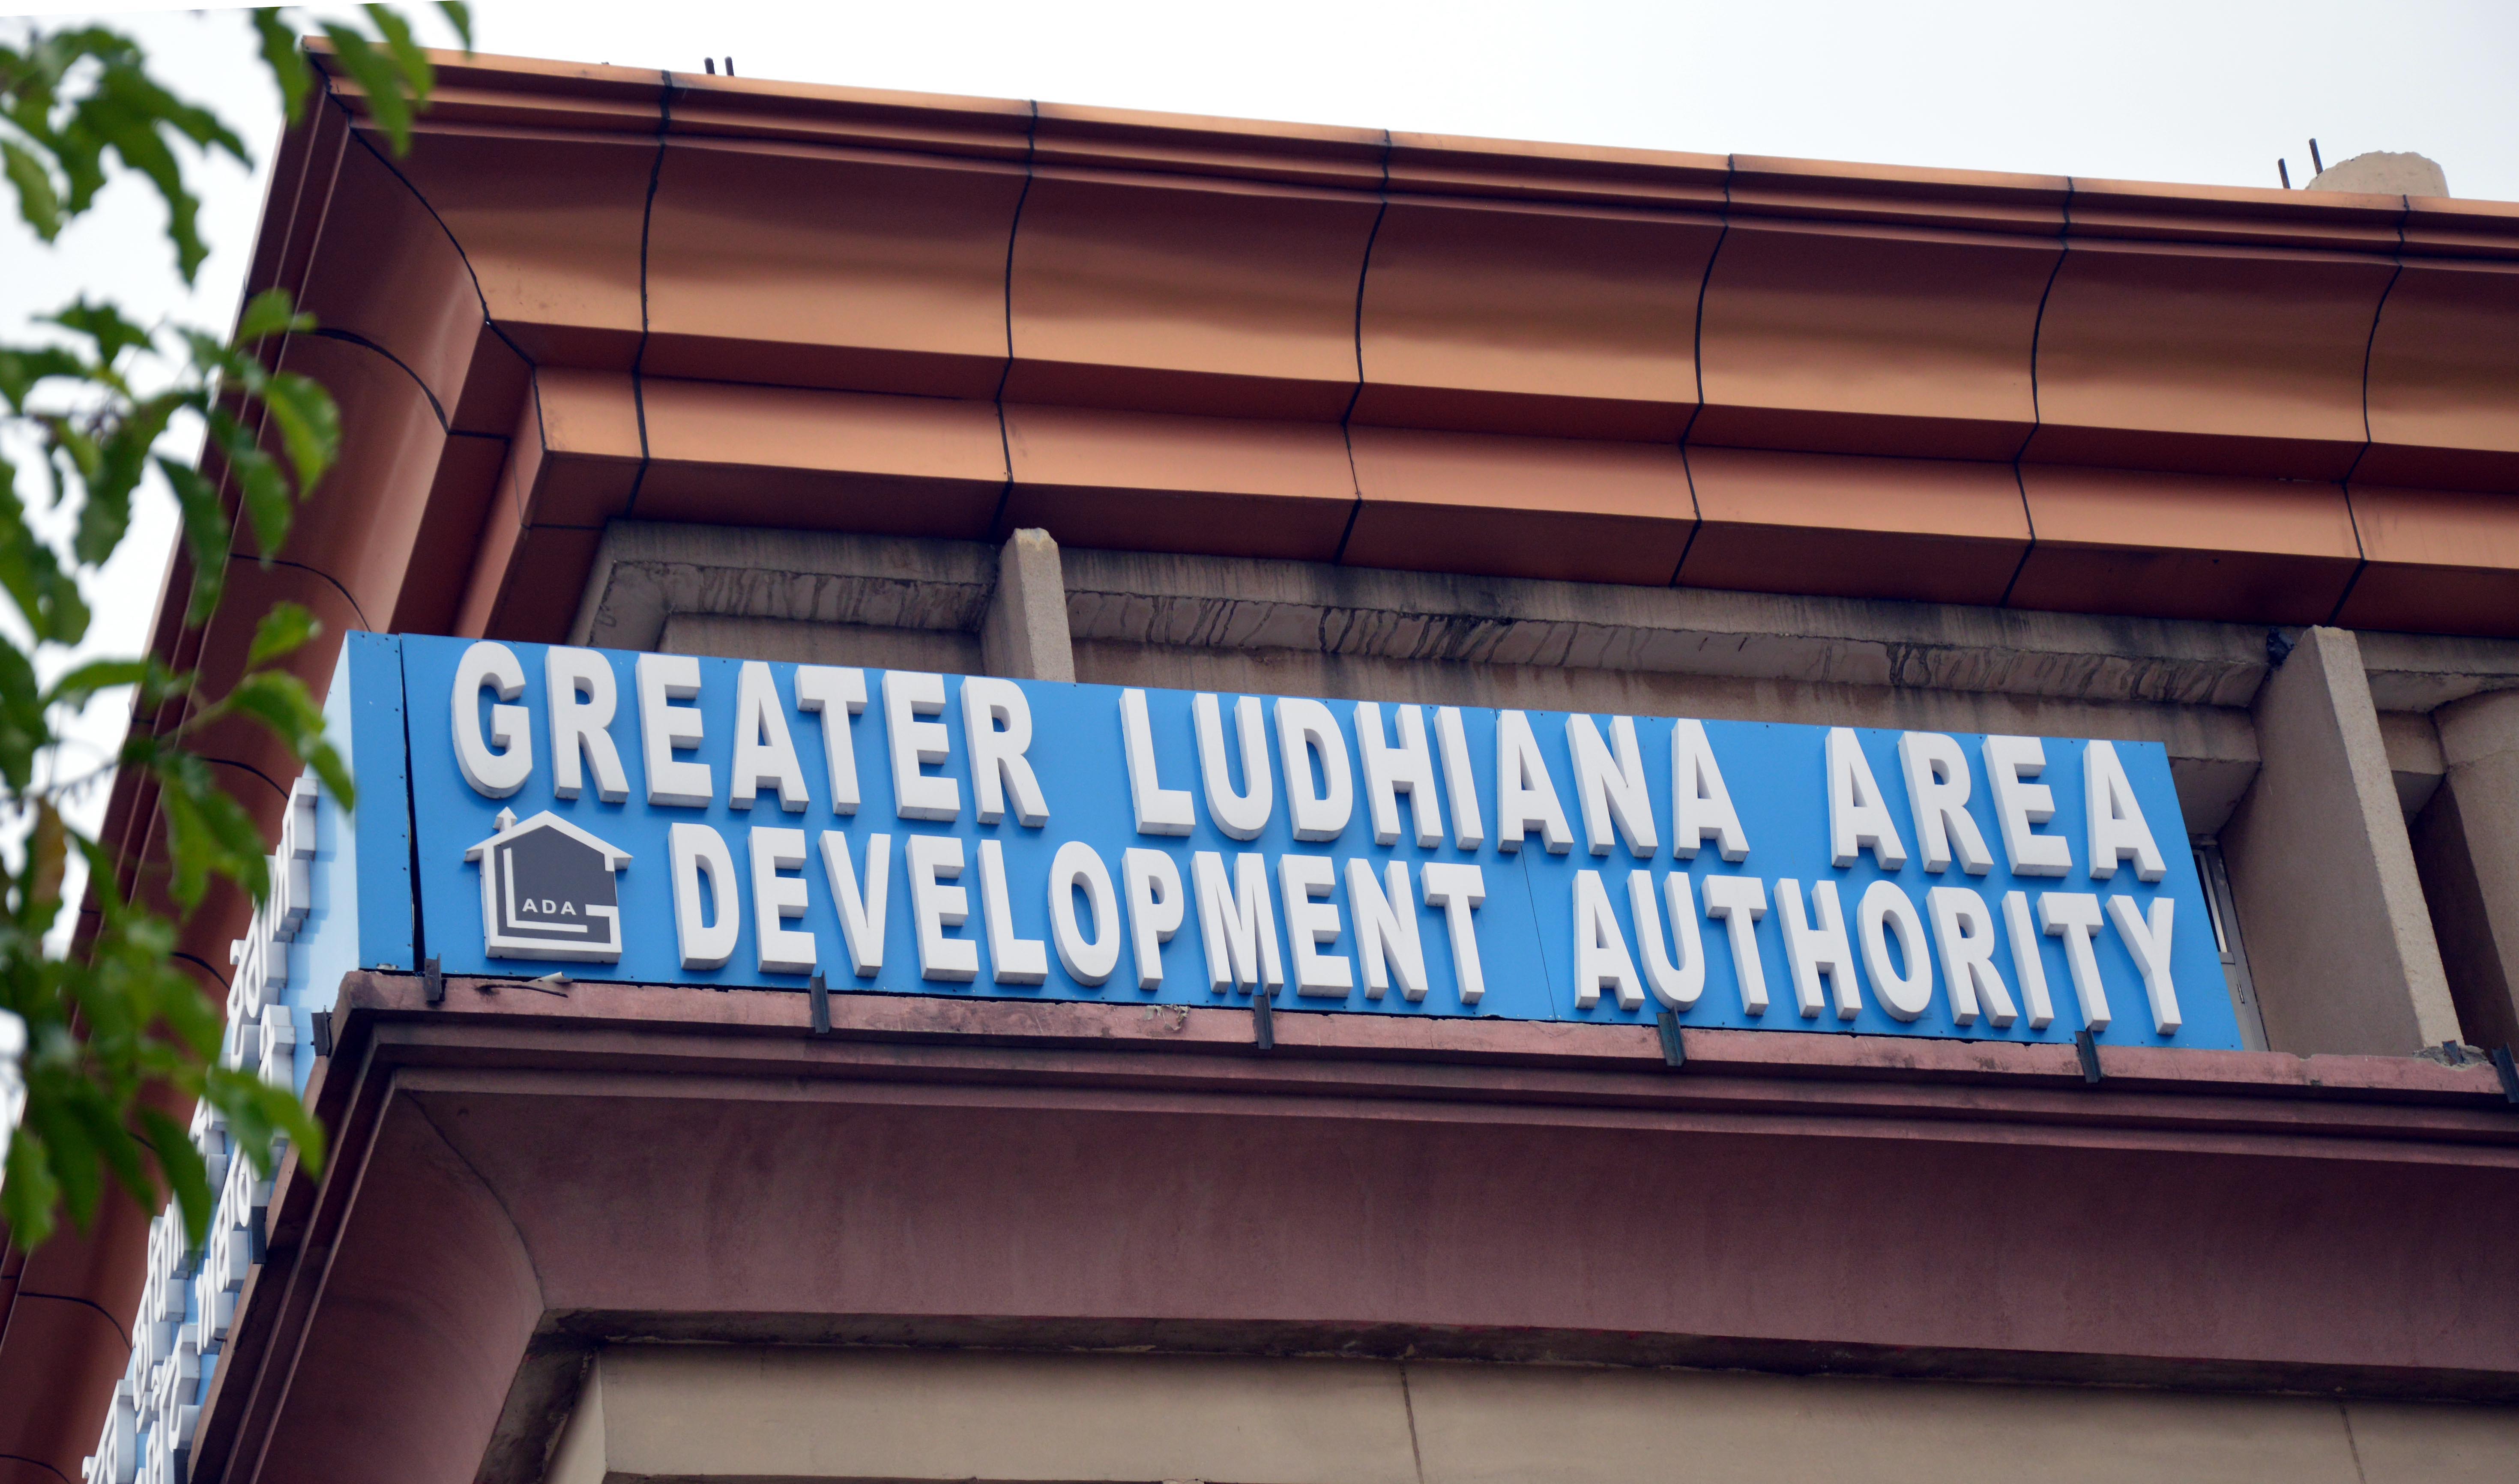 Ludhiana development authority officials in the dock